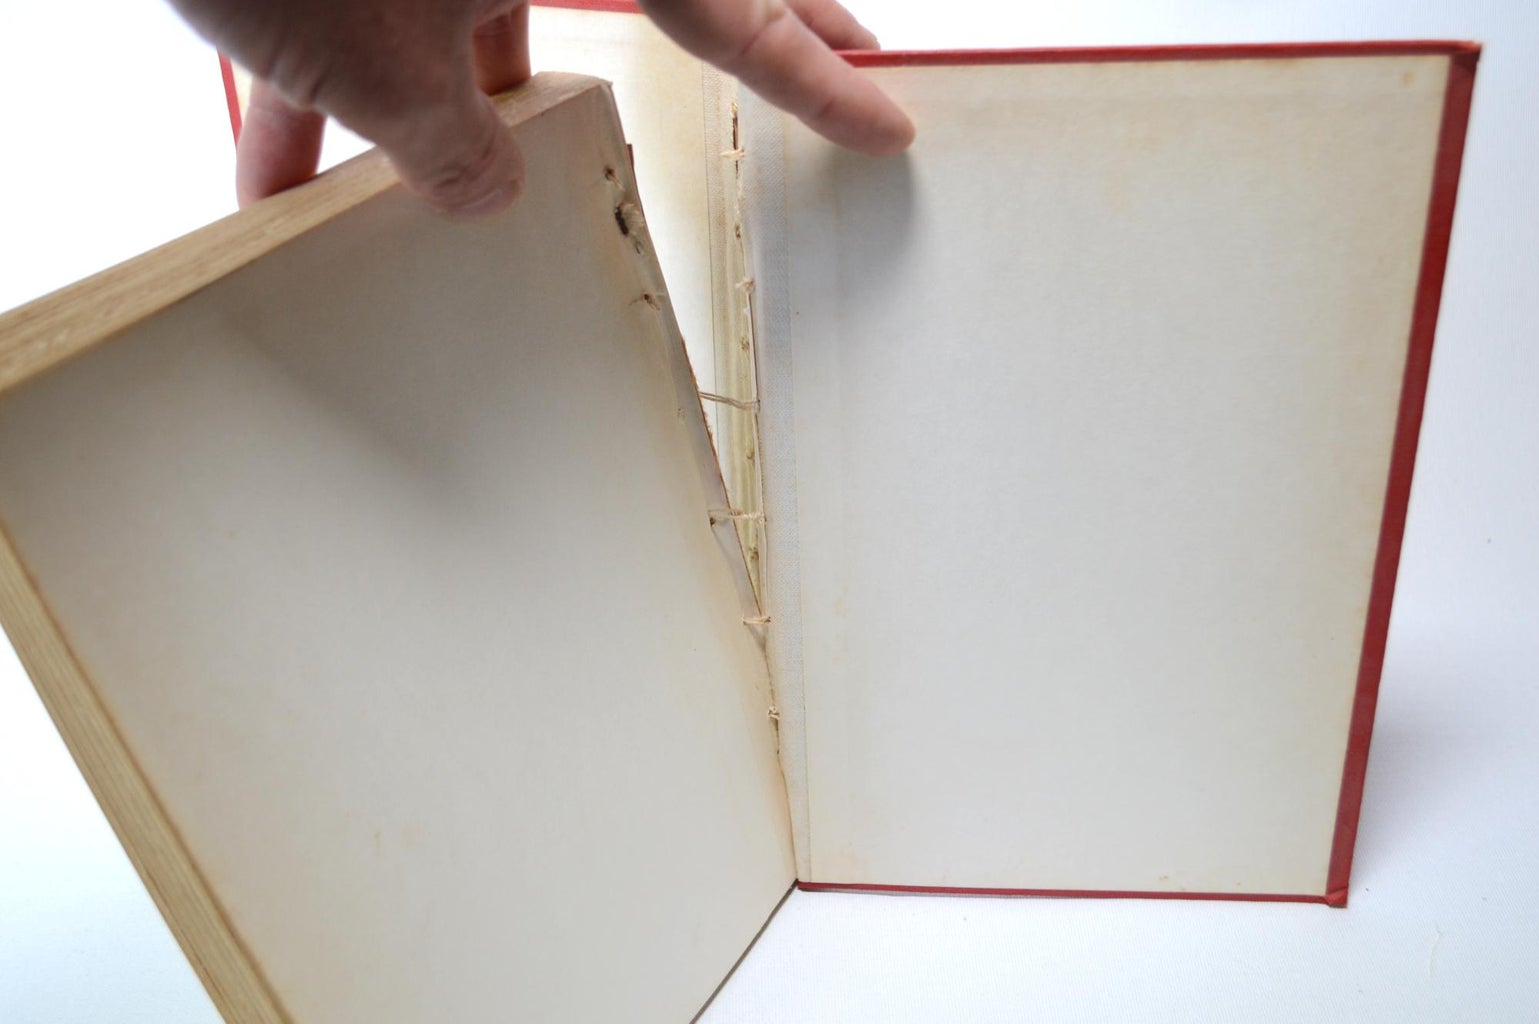 Removing the Cover From the Book